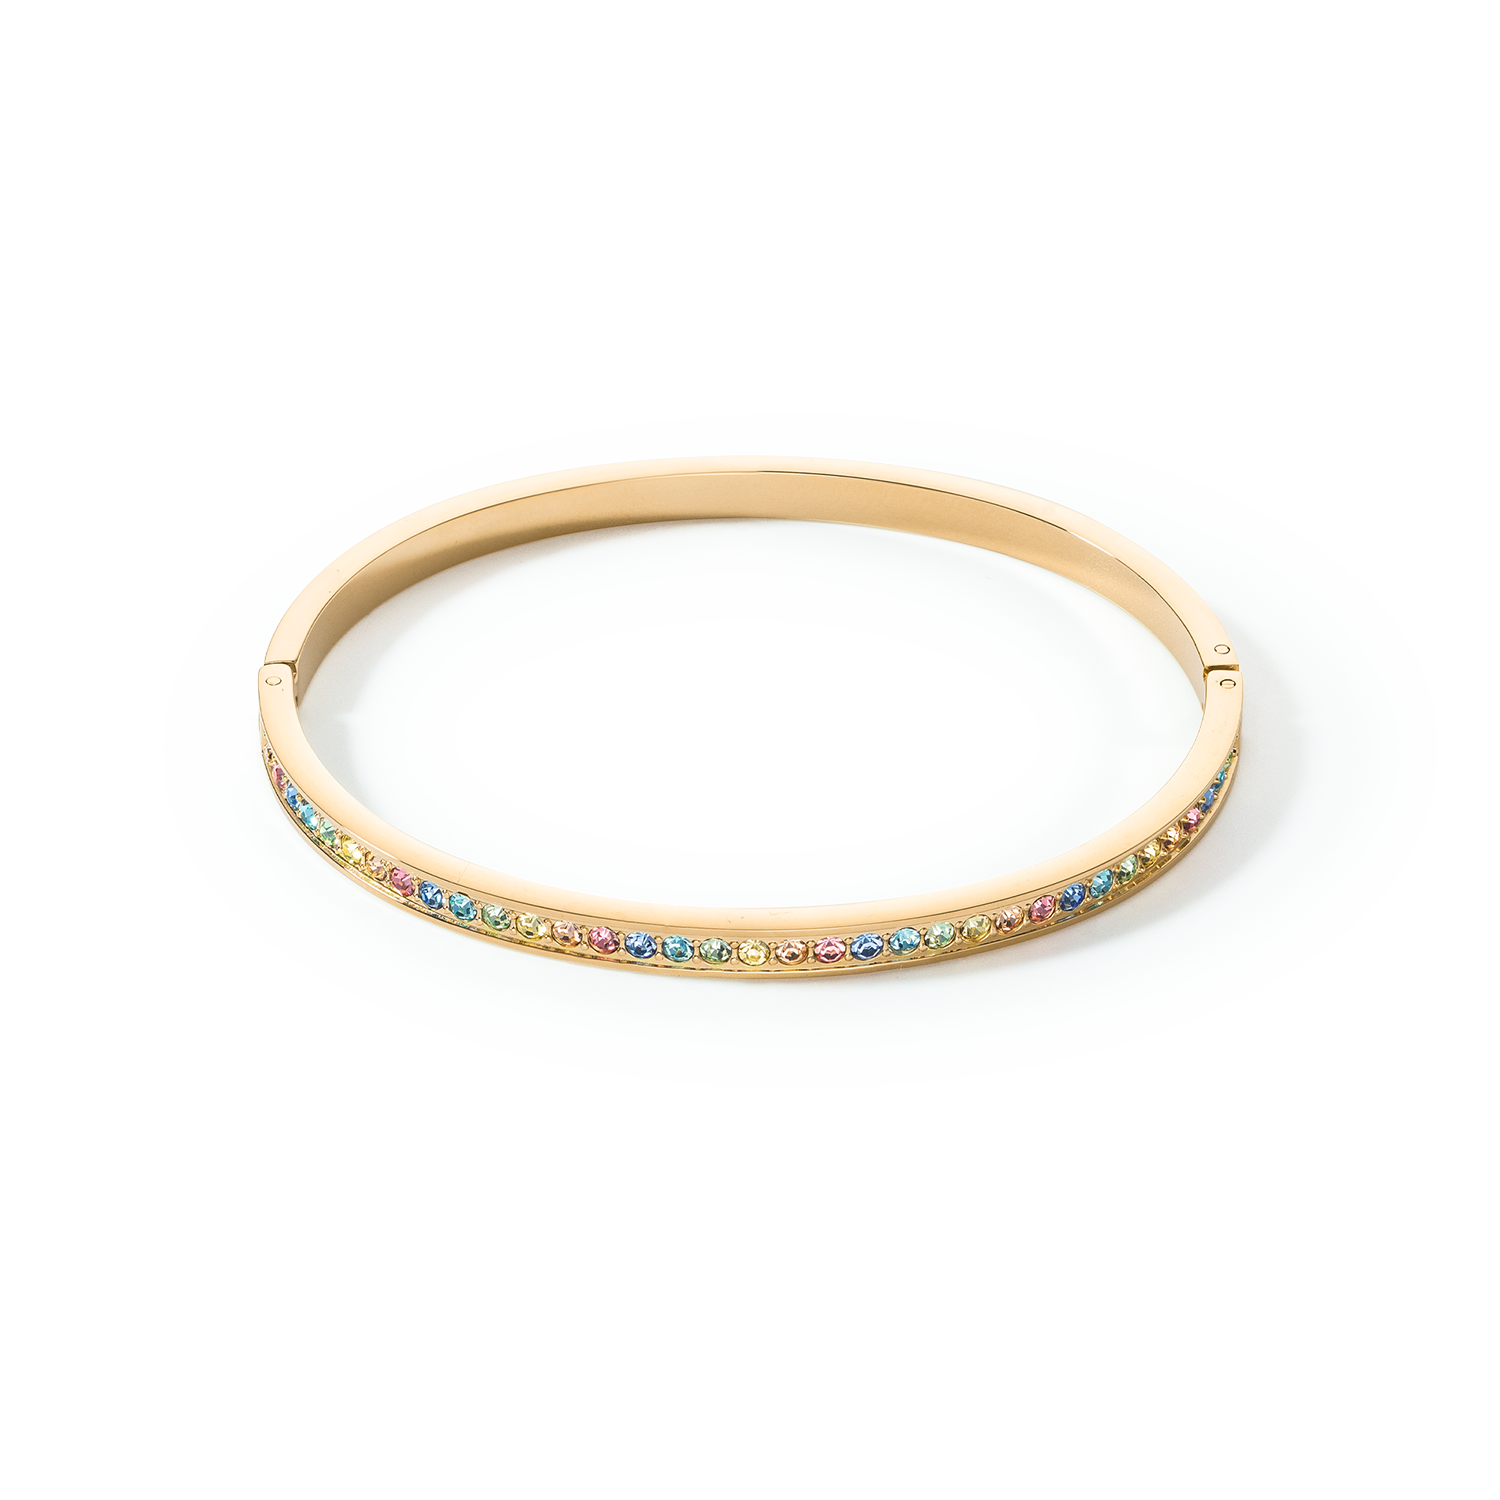 Bangle stainless steel & crystals slim gold multicolour pastel 19